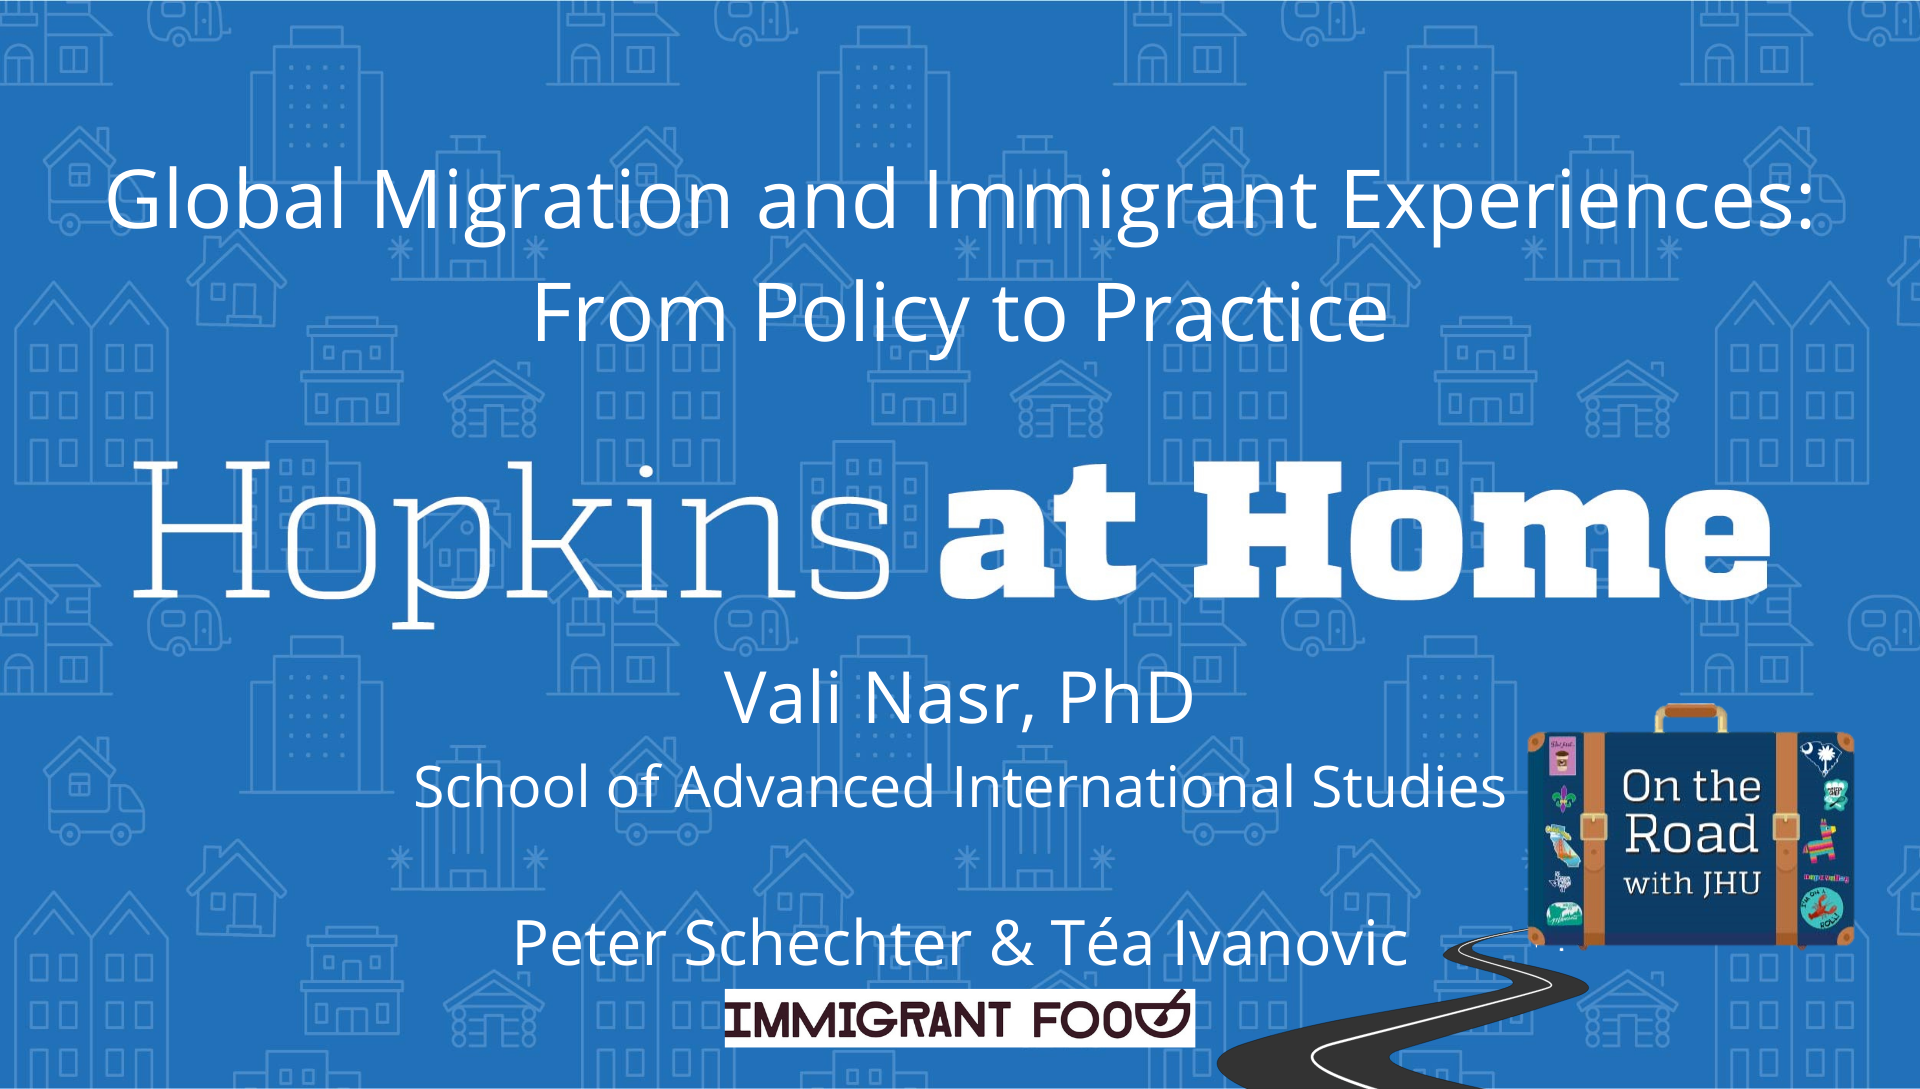 Global Migration and Immigrant Experiences: From Policy to Practice